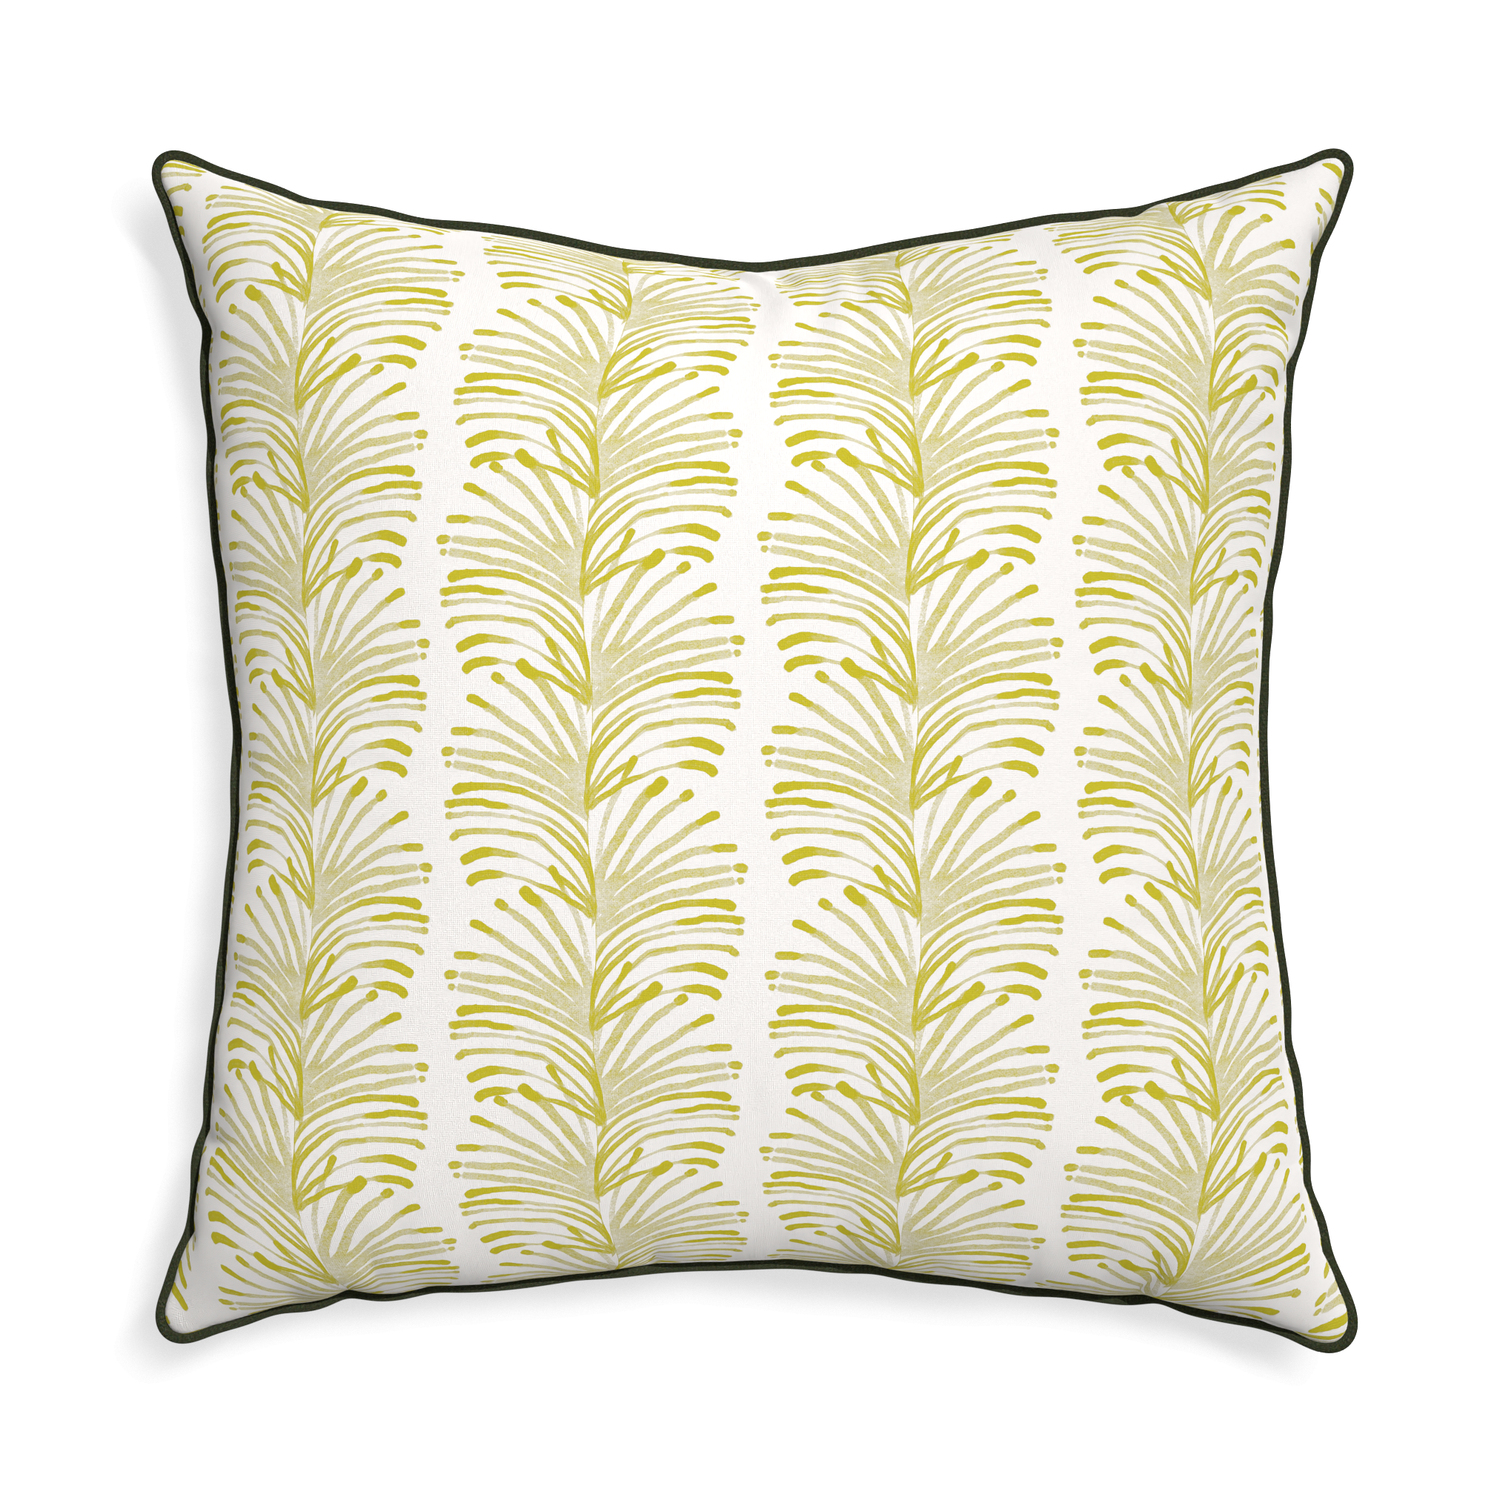 Euro-sham emma chartreuse custom yellow stripe chartreusepillow with f piping on white background